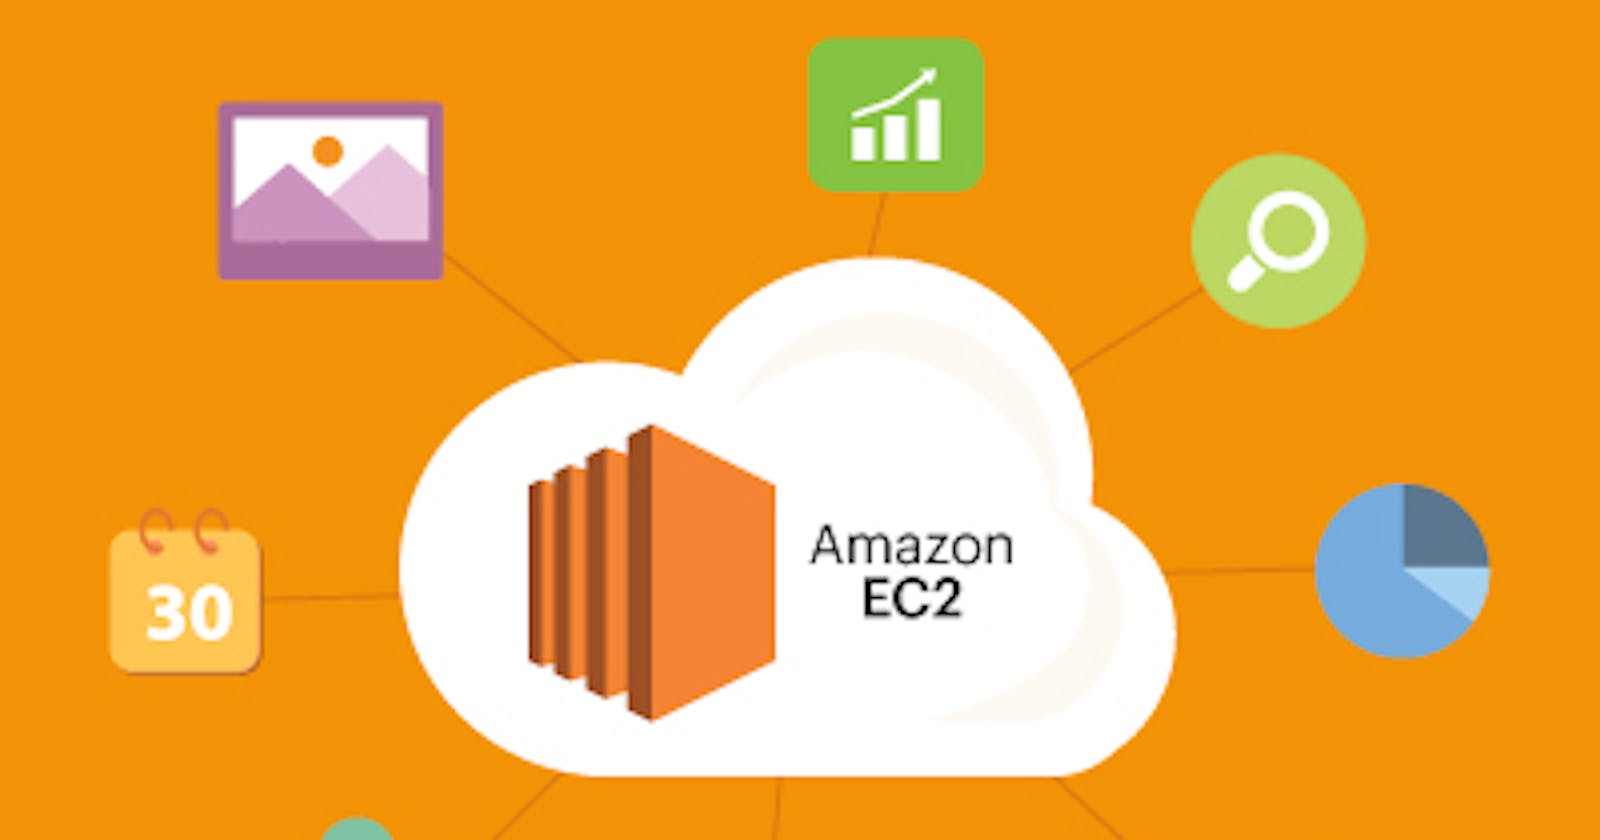 How To Launch an AWS EC2 instance